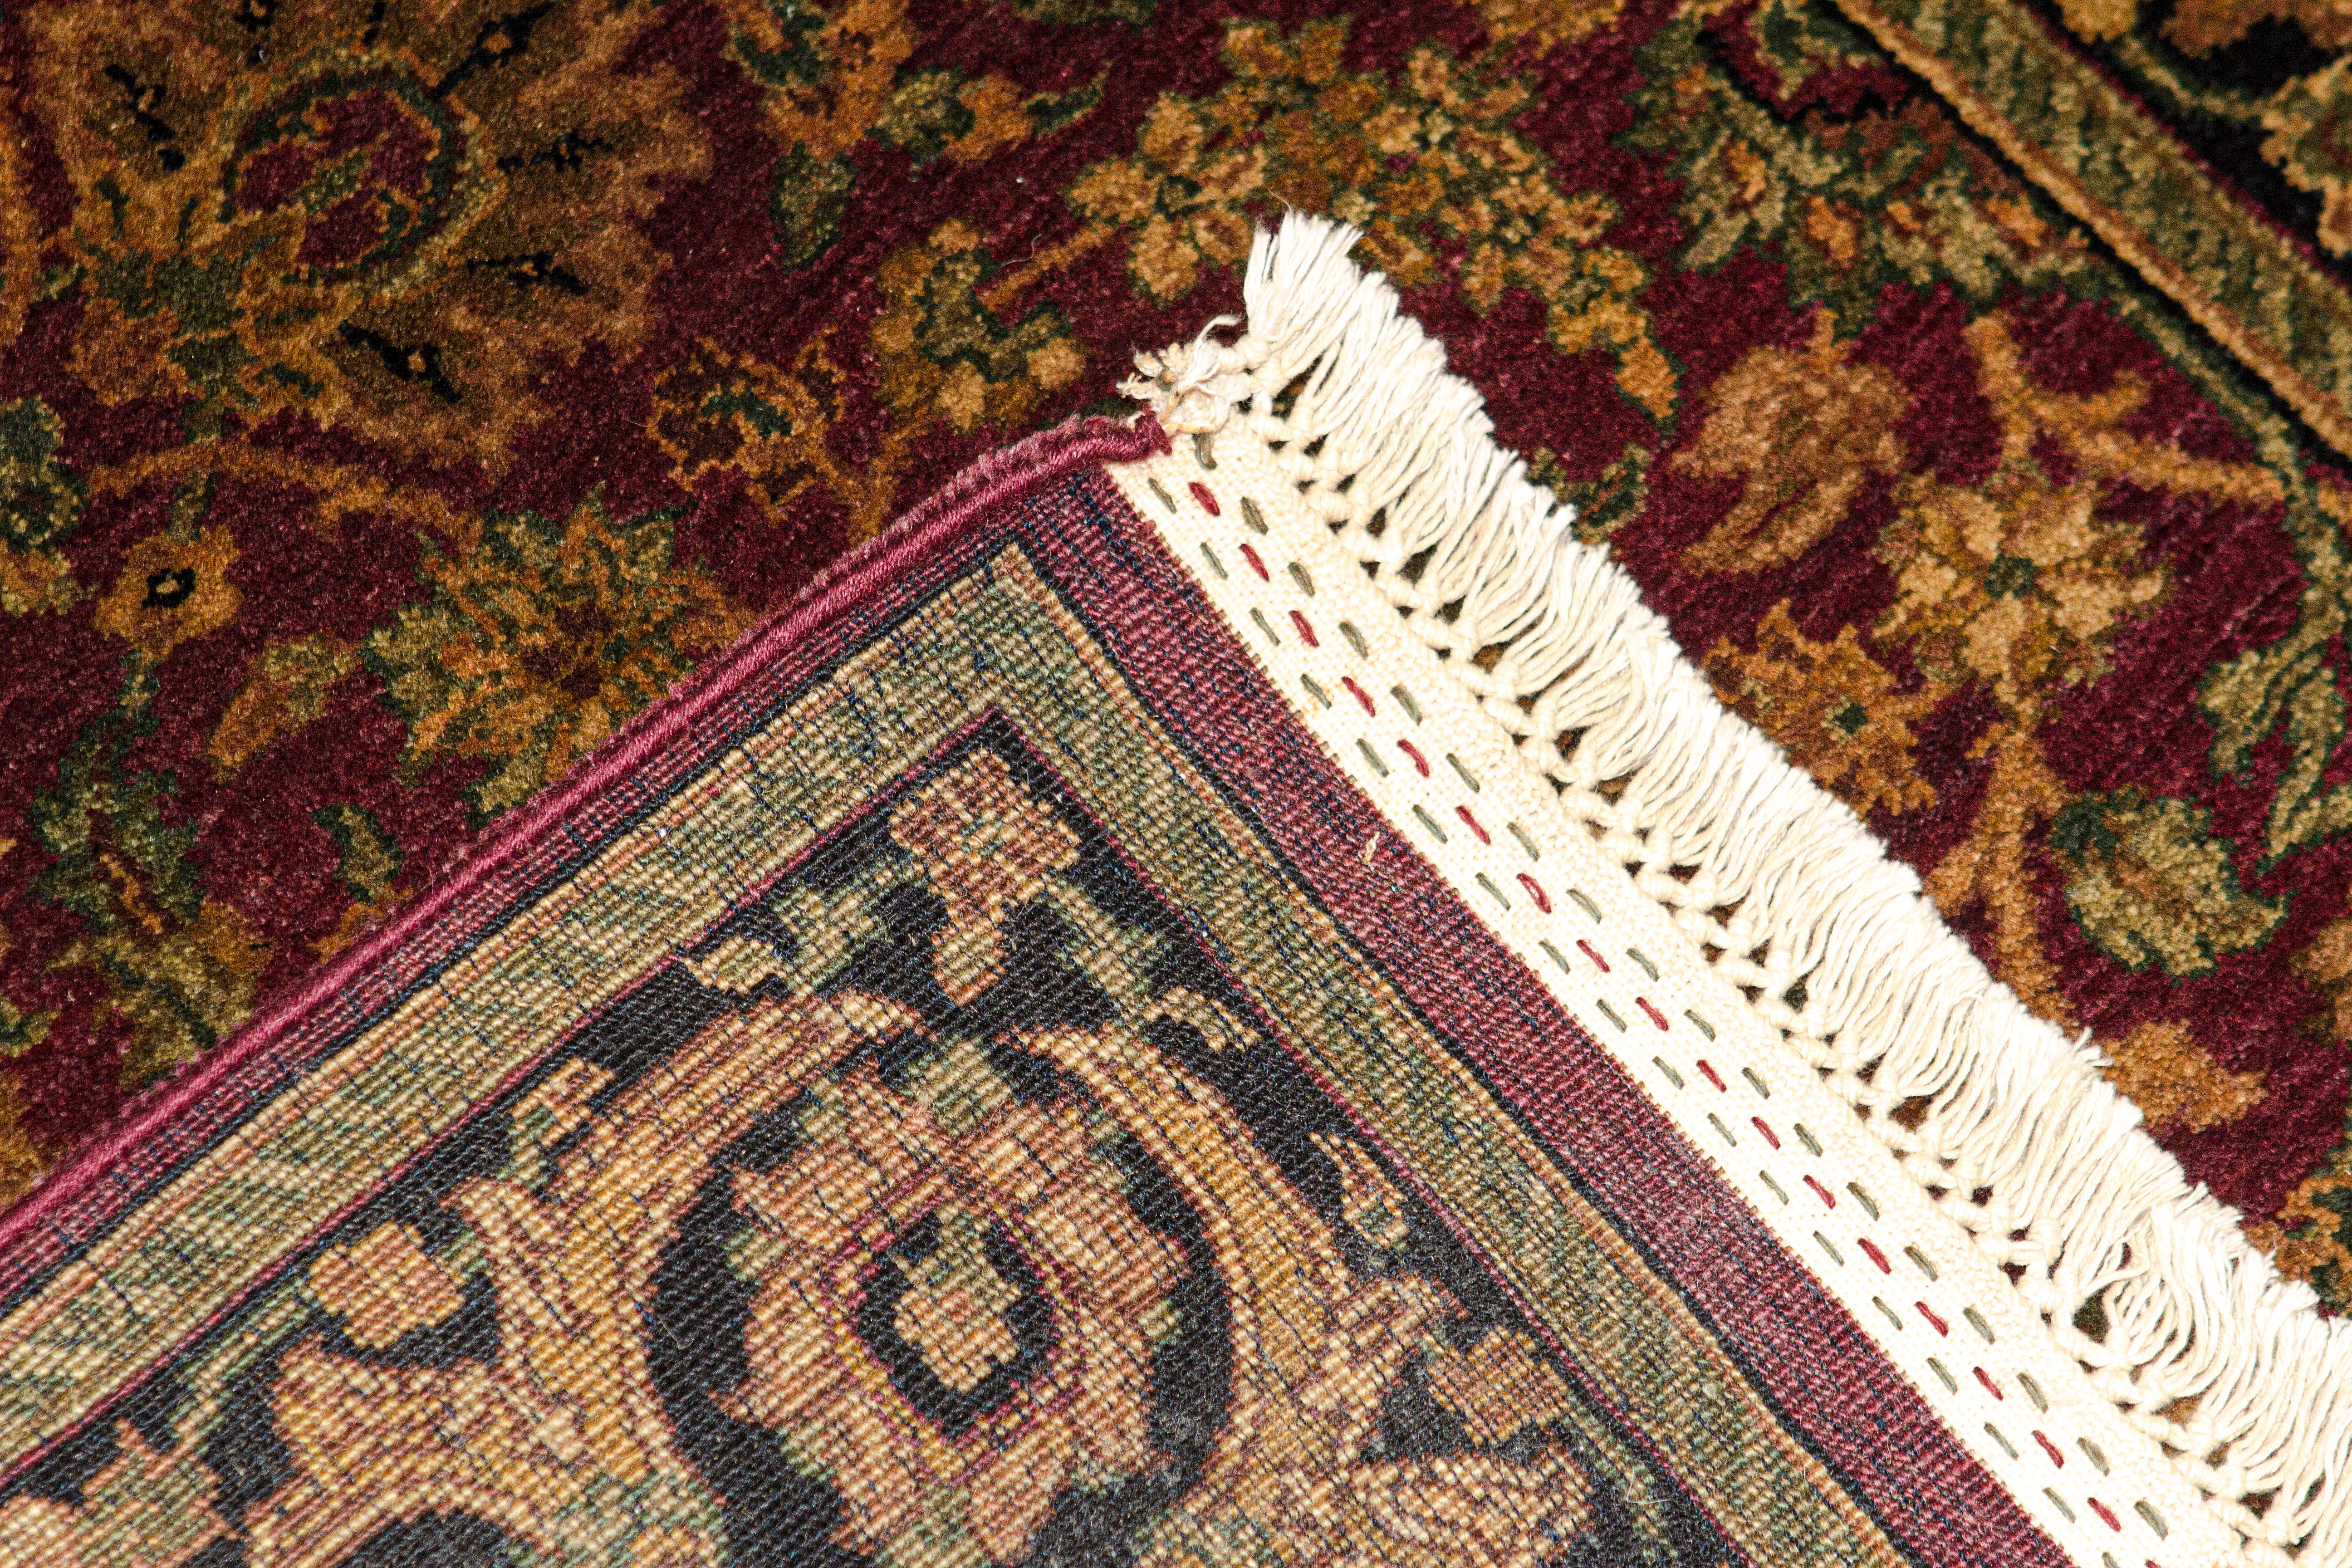 The authentic styles of traditional oriental masterpieces are recreated here, reflecting an ageless beauty in the presentation of these fine traditional handwoven rugs. Each piece is unique in representing carpets of a bygone age. The wool is from a